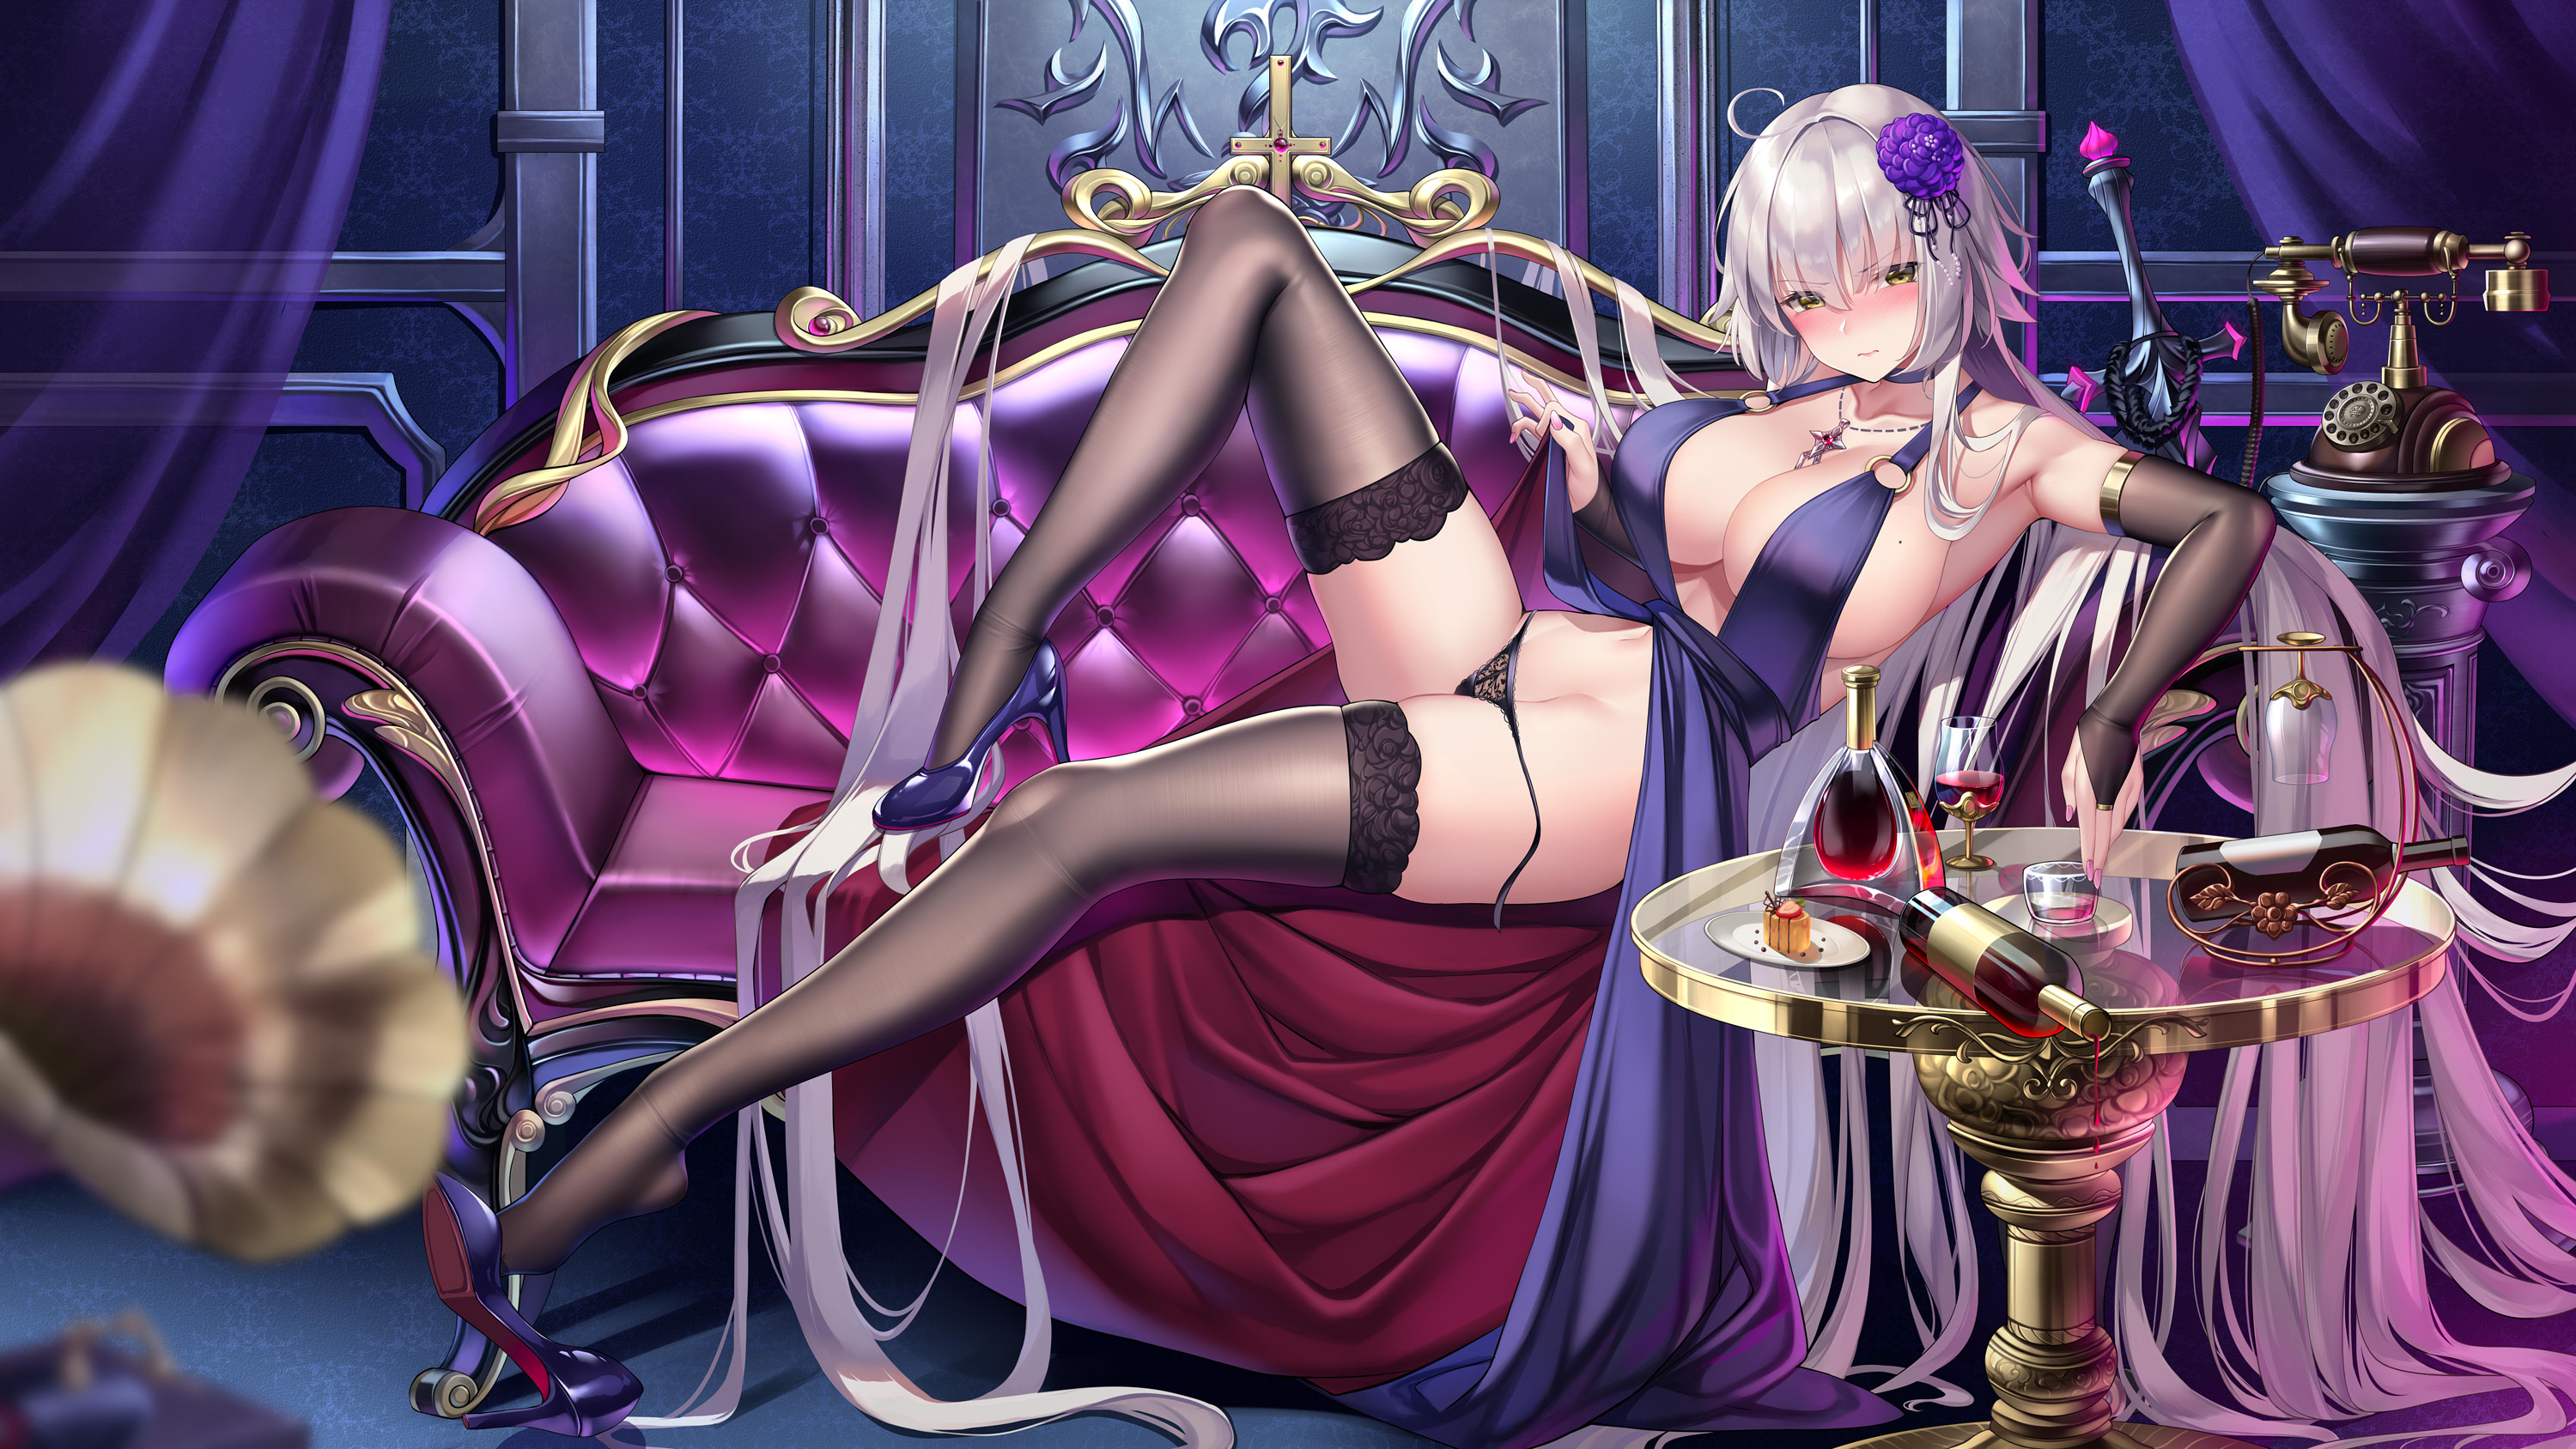 Anime 3000x1688 MeIoN Fate/Grand Order anime girls anime stockings big boobs wine sweets heels cleavage white hair panties Fate series Jeanne d'Arc (Fate) Jeanne (Alter) (Fate/Grand Order)